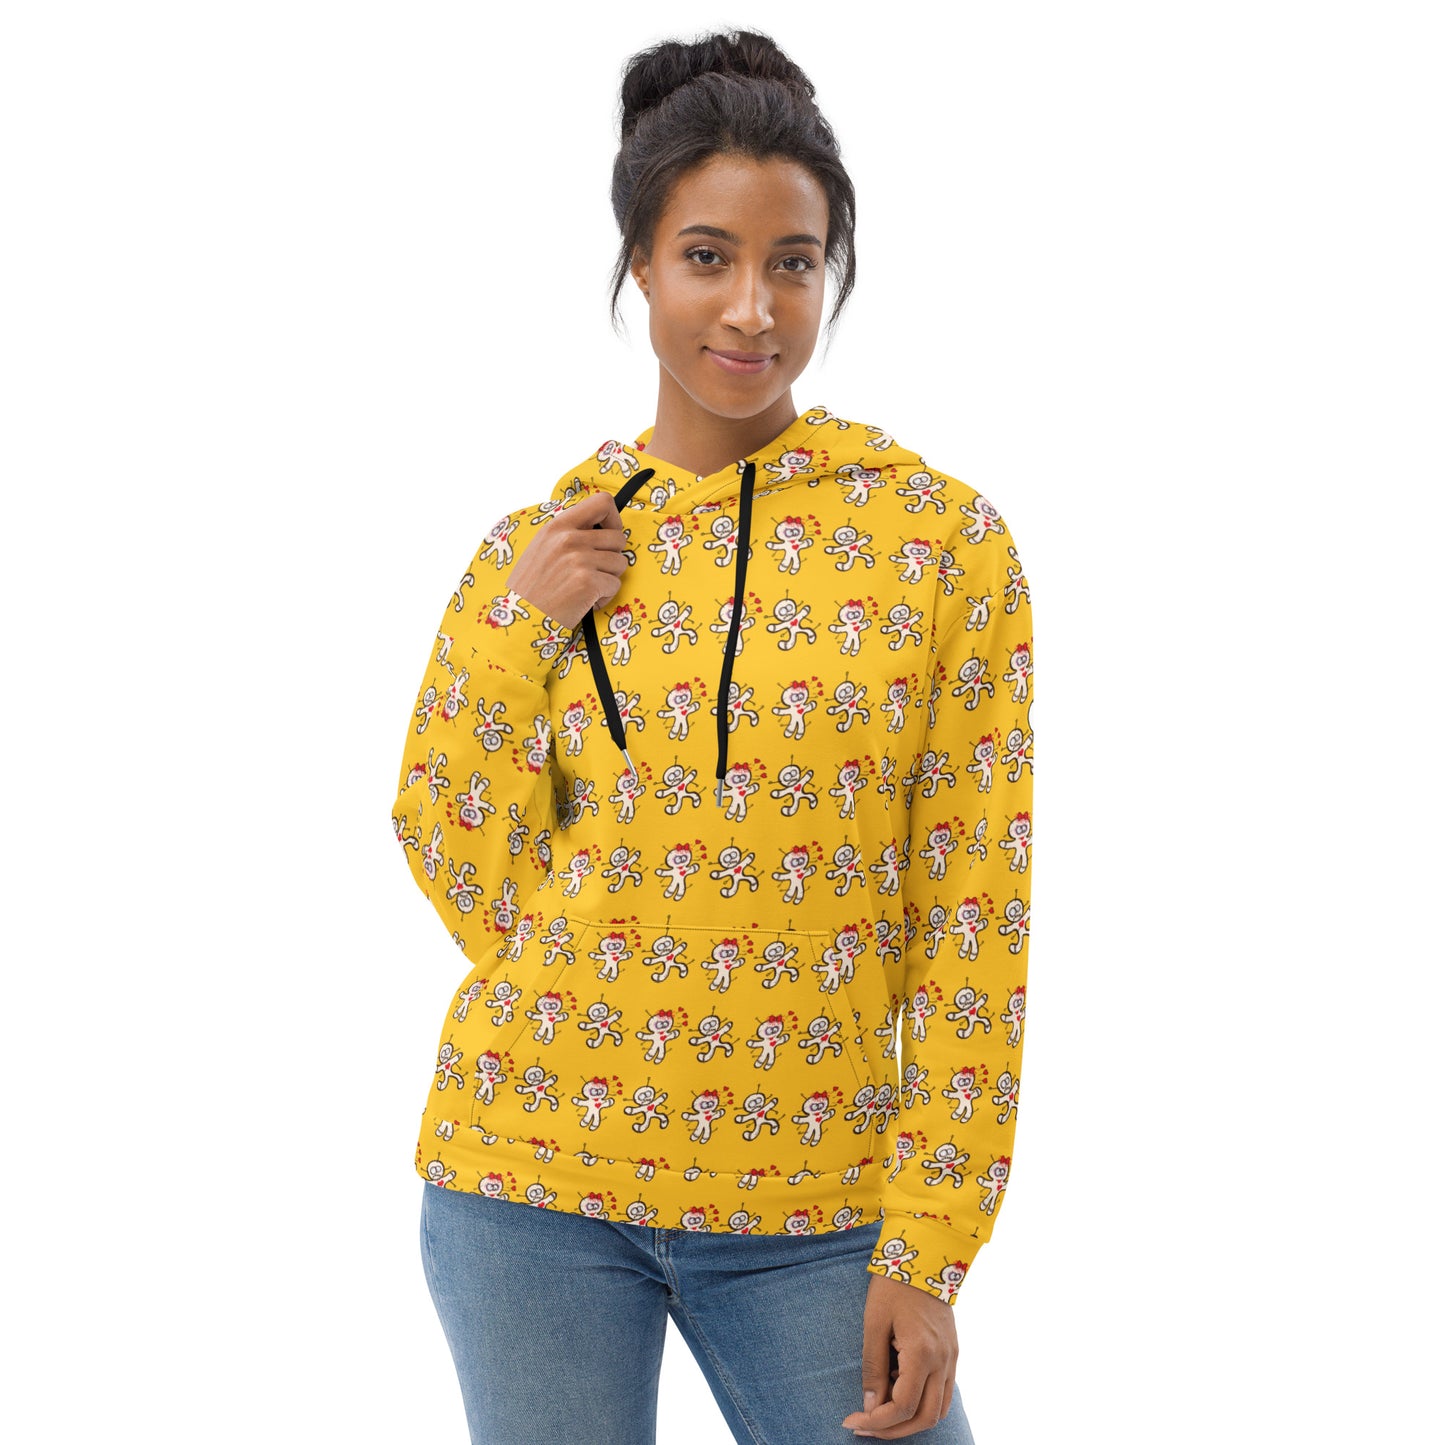 Voodoo Love Chase: Spooky Romance VooDuo - All-over Print Unisex Hoodie by Zoo&co